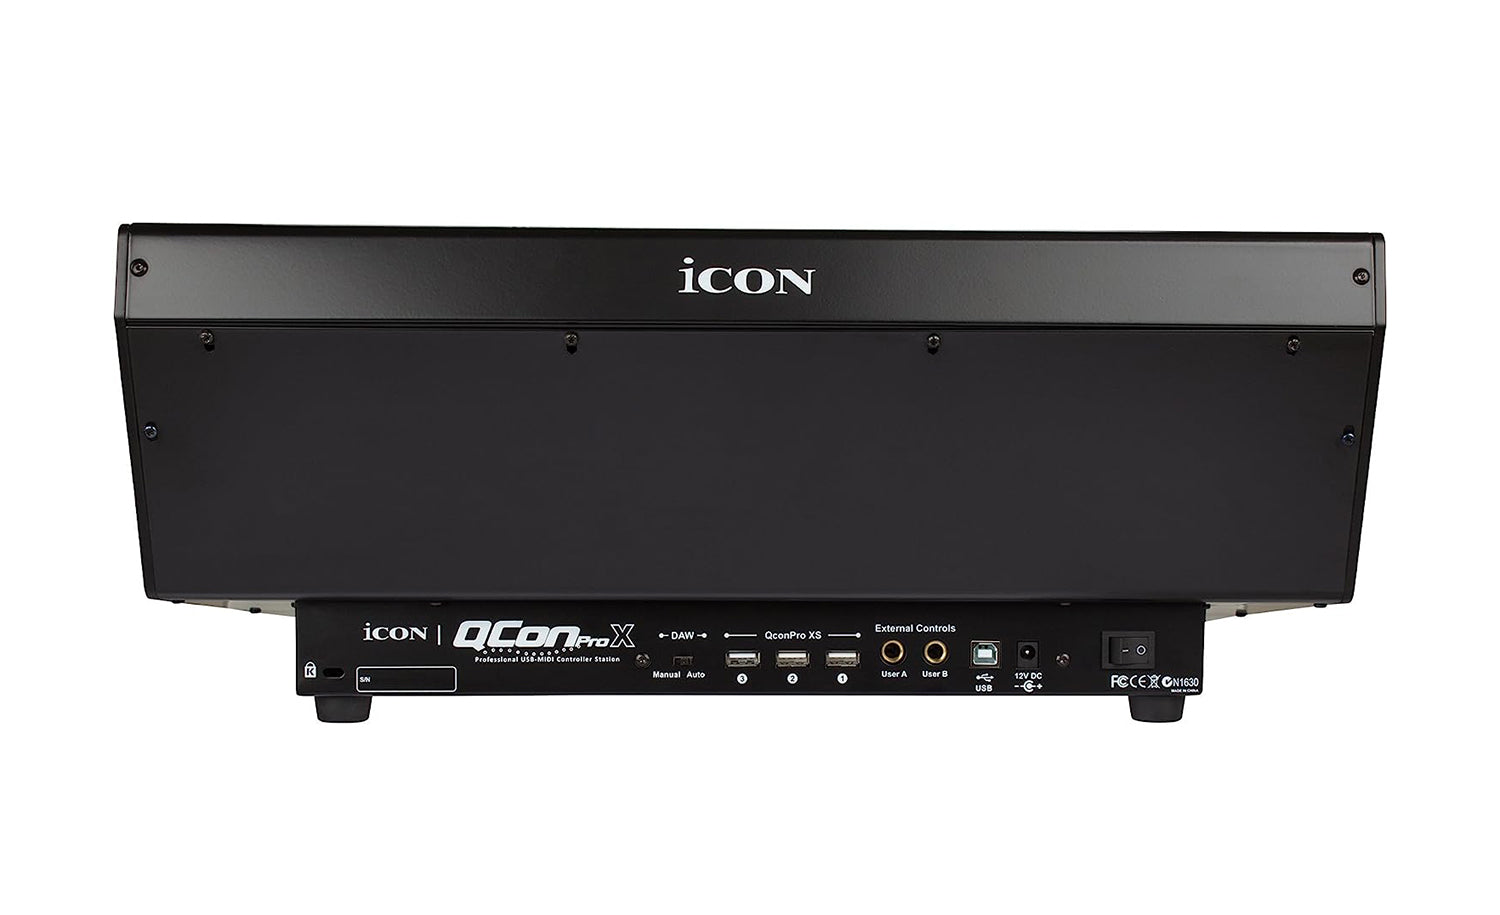 Icon Pro Audio QCONPROX with 9 Full Sized Motorized Faders DAW Control Surface - Hollywood DJ